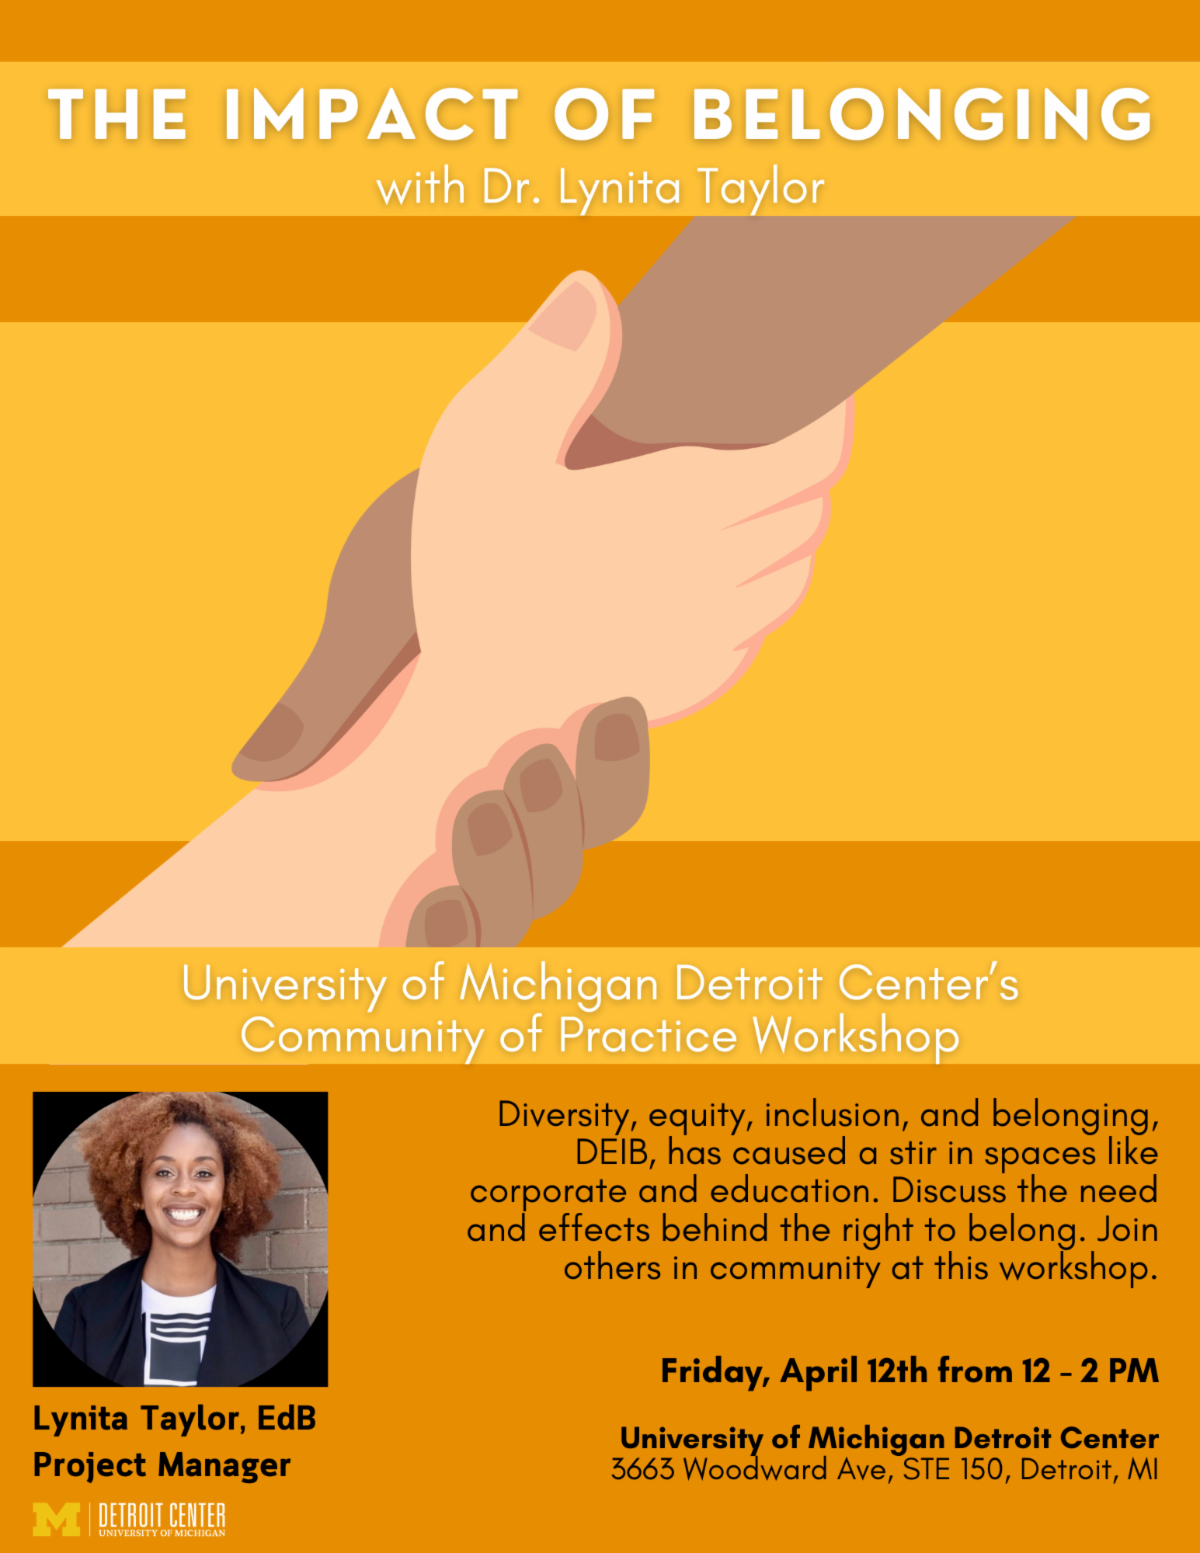 Impact of Belonging event flyer with illustration of two hands holding onto one another and an image of Lynita Taylor